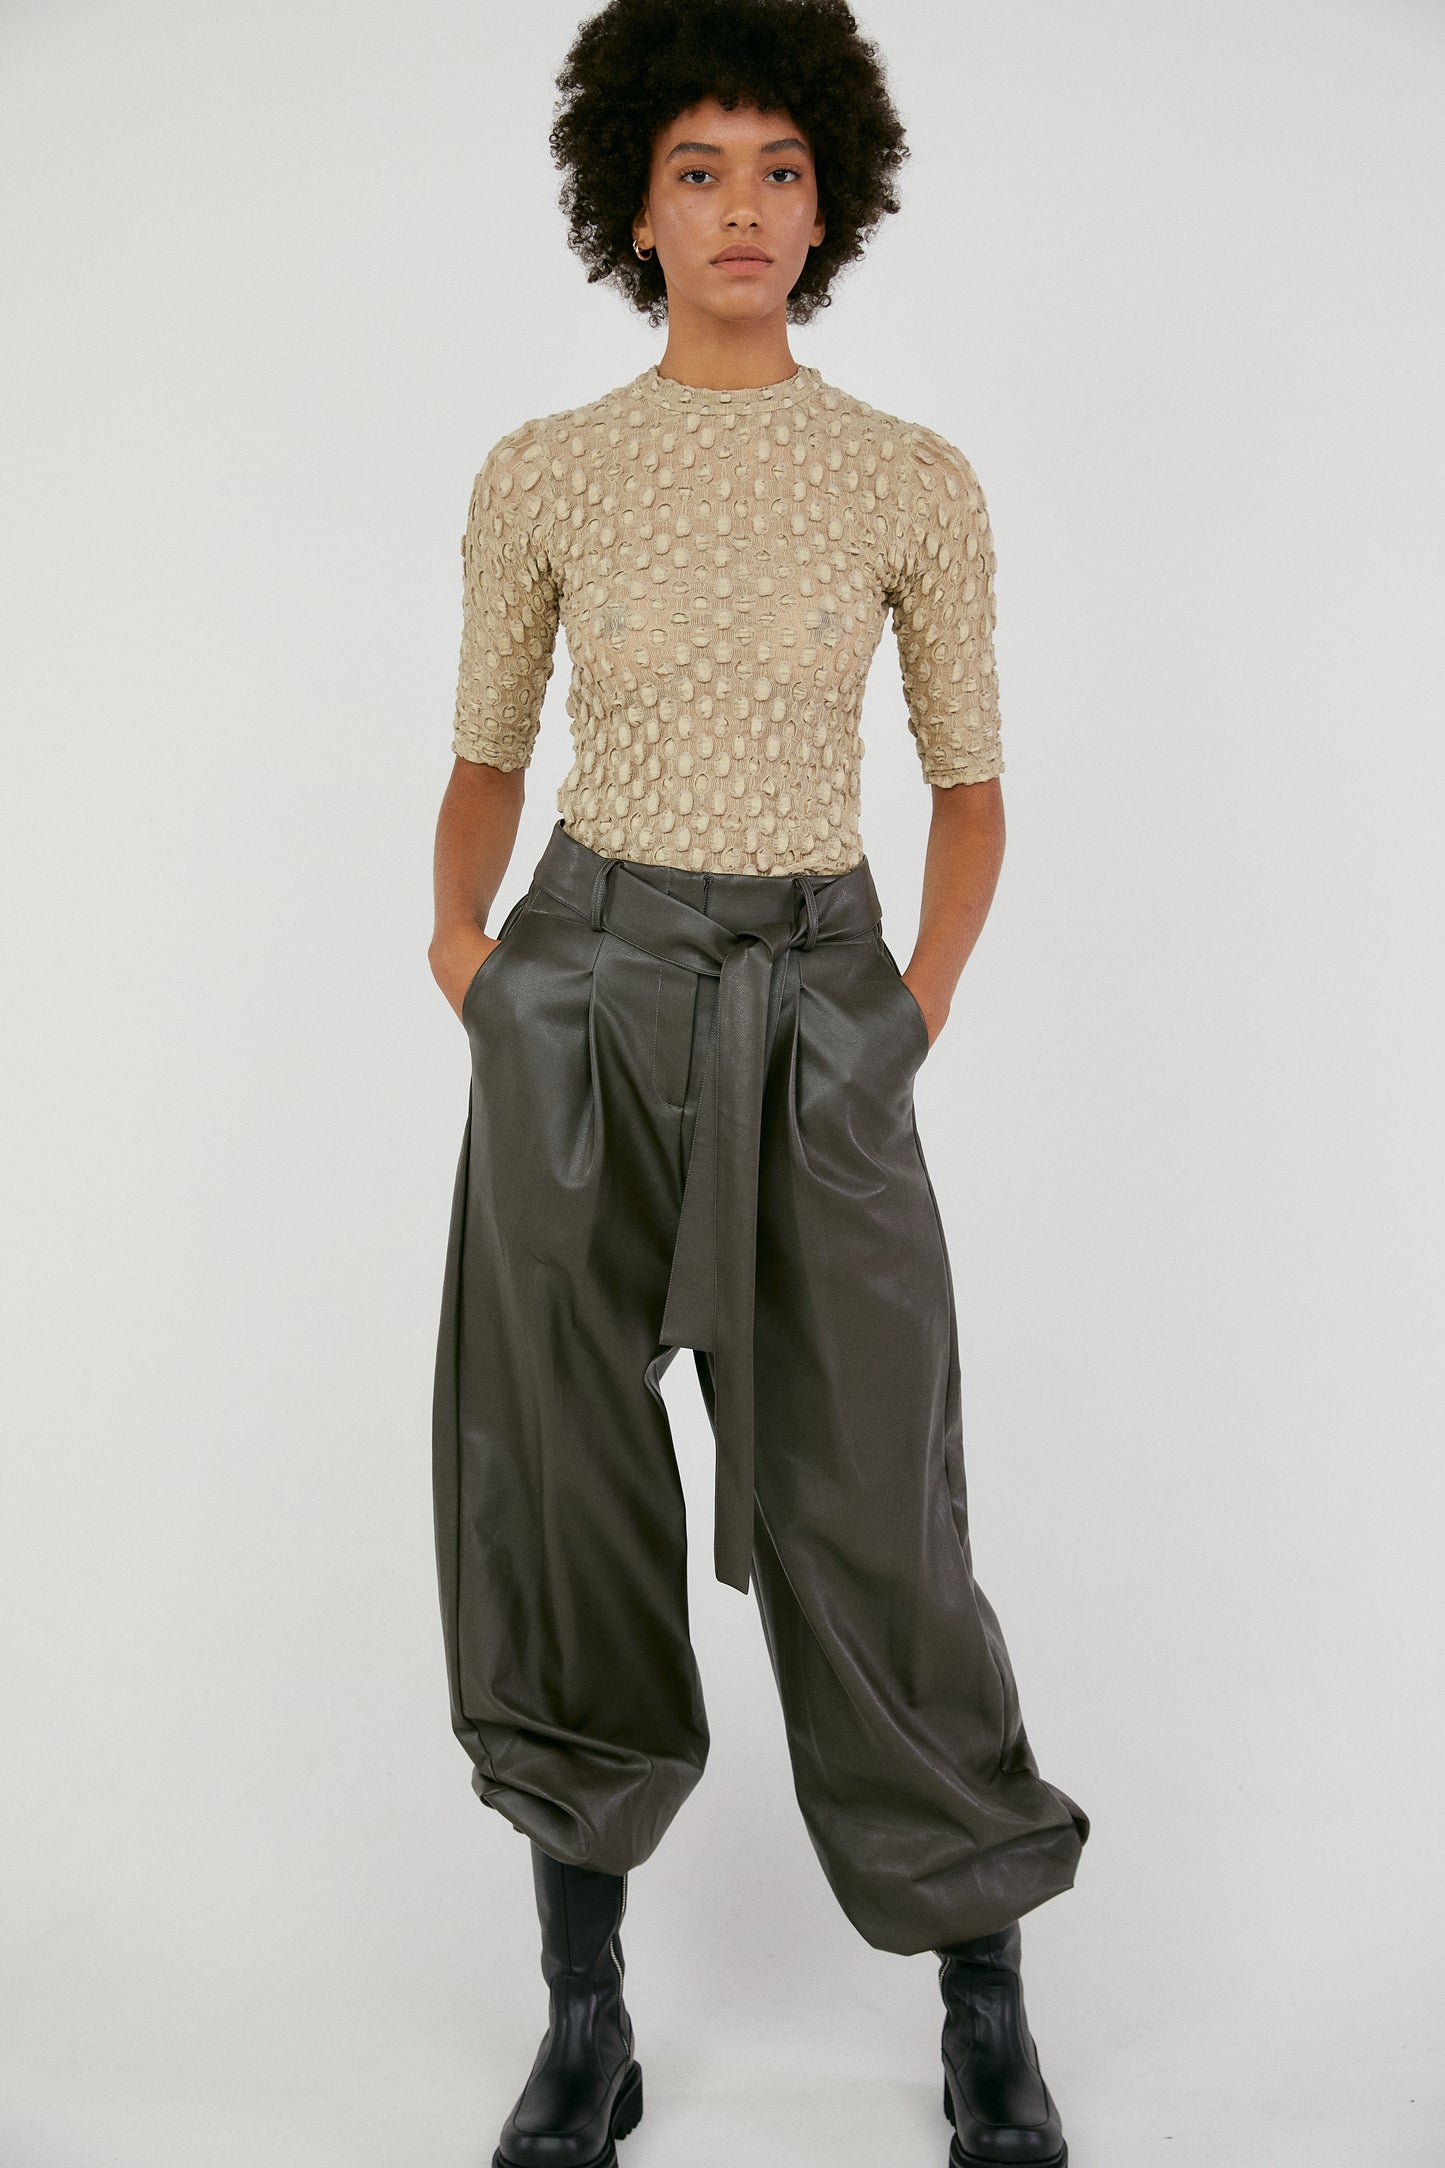 Dotted Texture Top, Khaki Beige